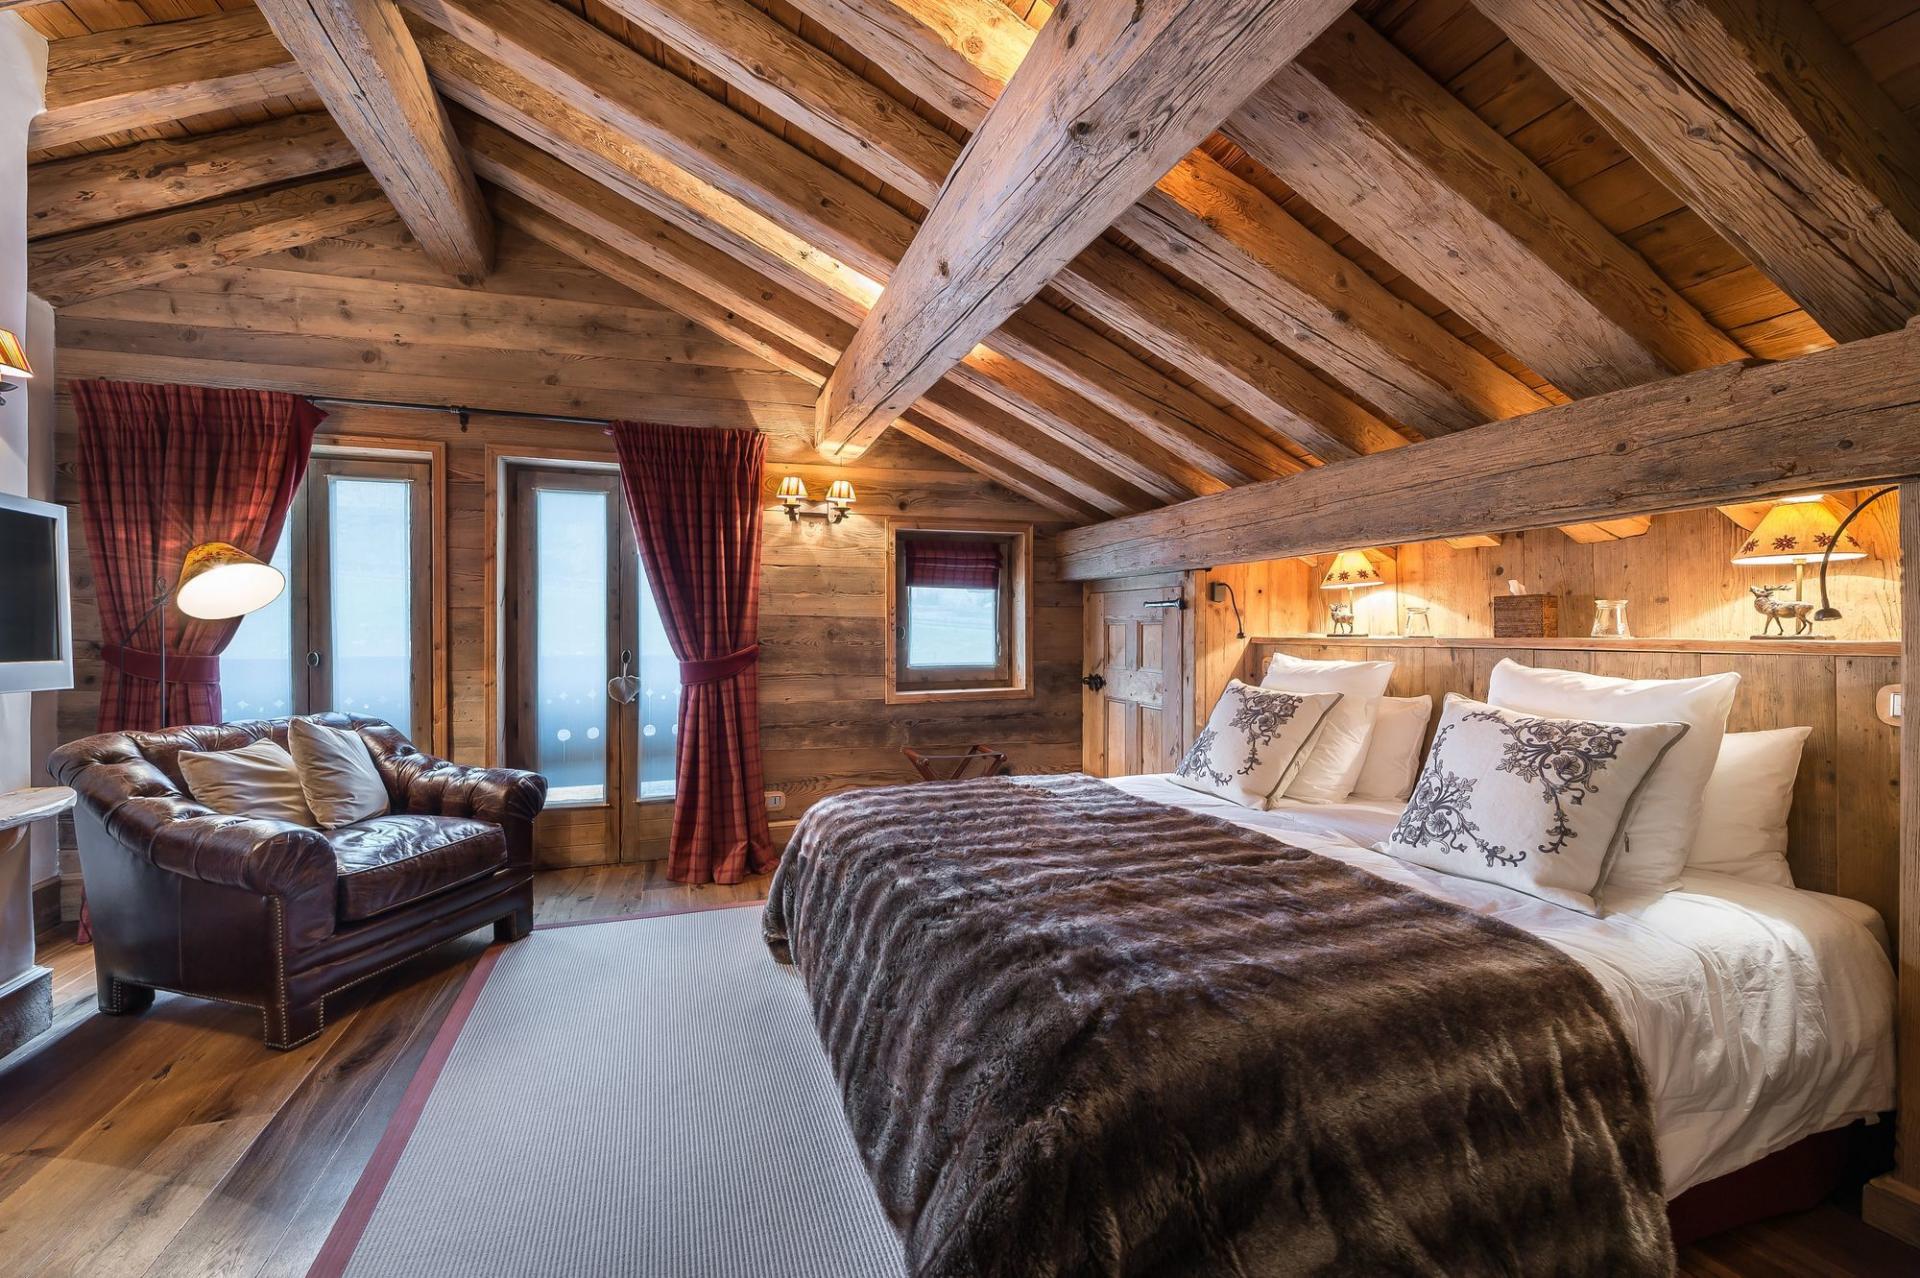 ANOTHER GUEST BEDROOM IN CHALET BELLECOTE